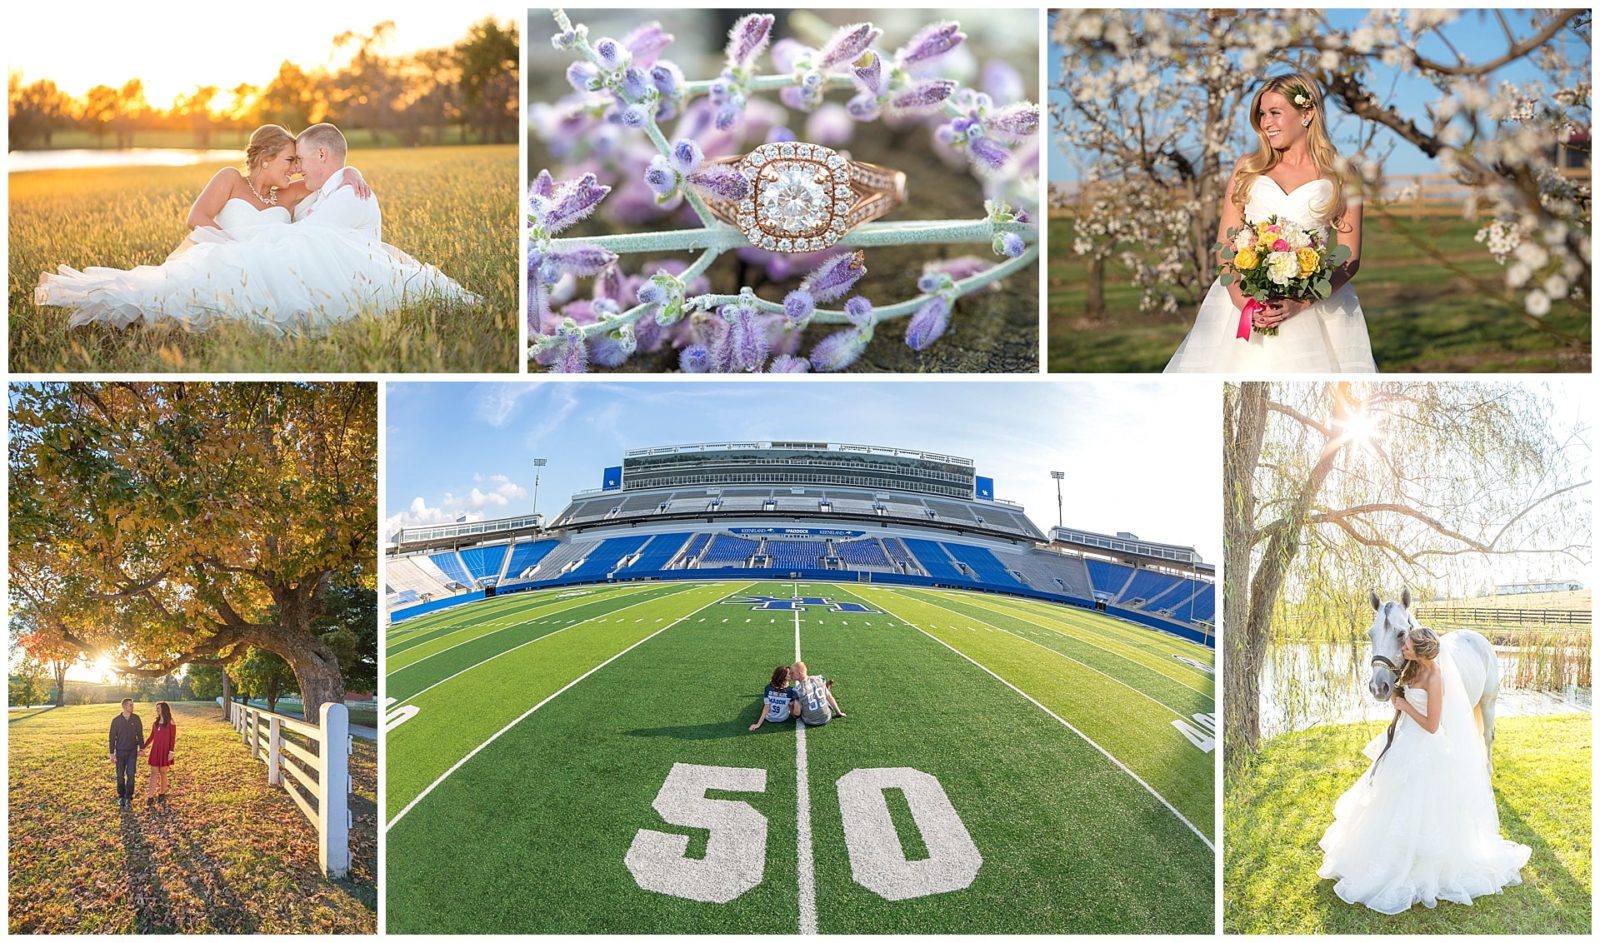 Collage of engagement photos and weddings in Lexington, KY